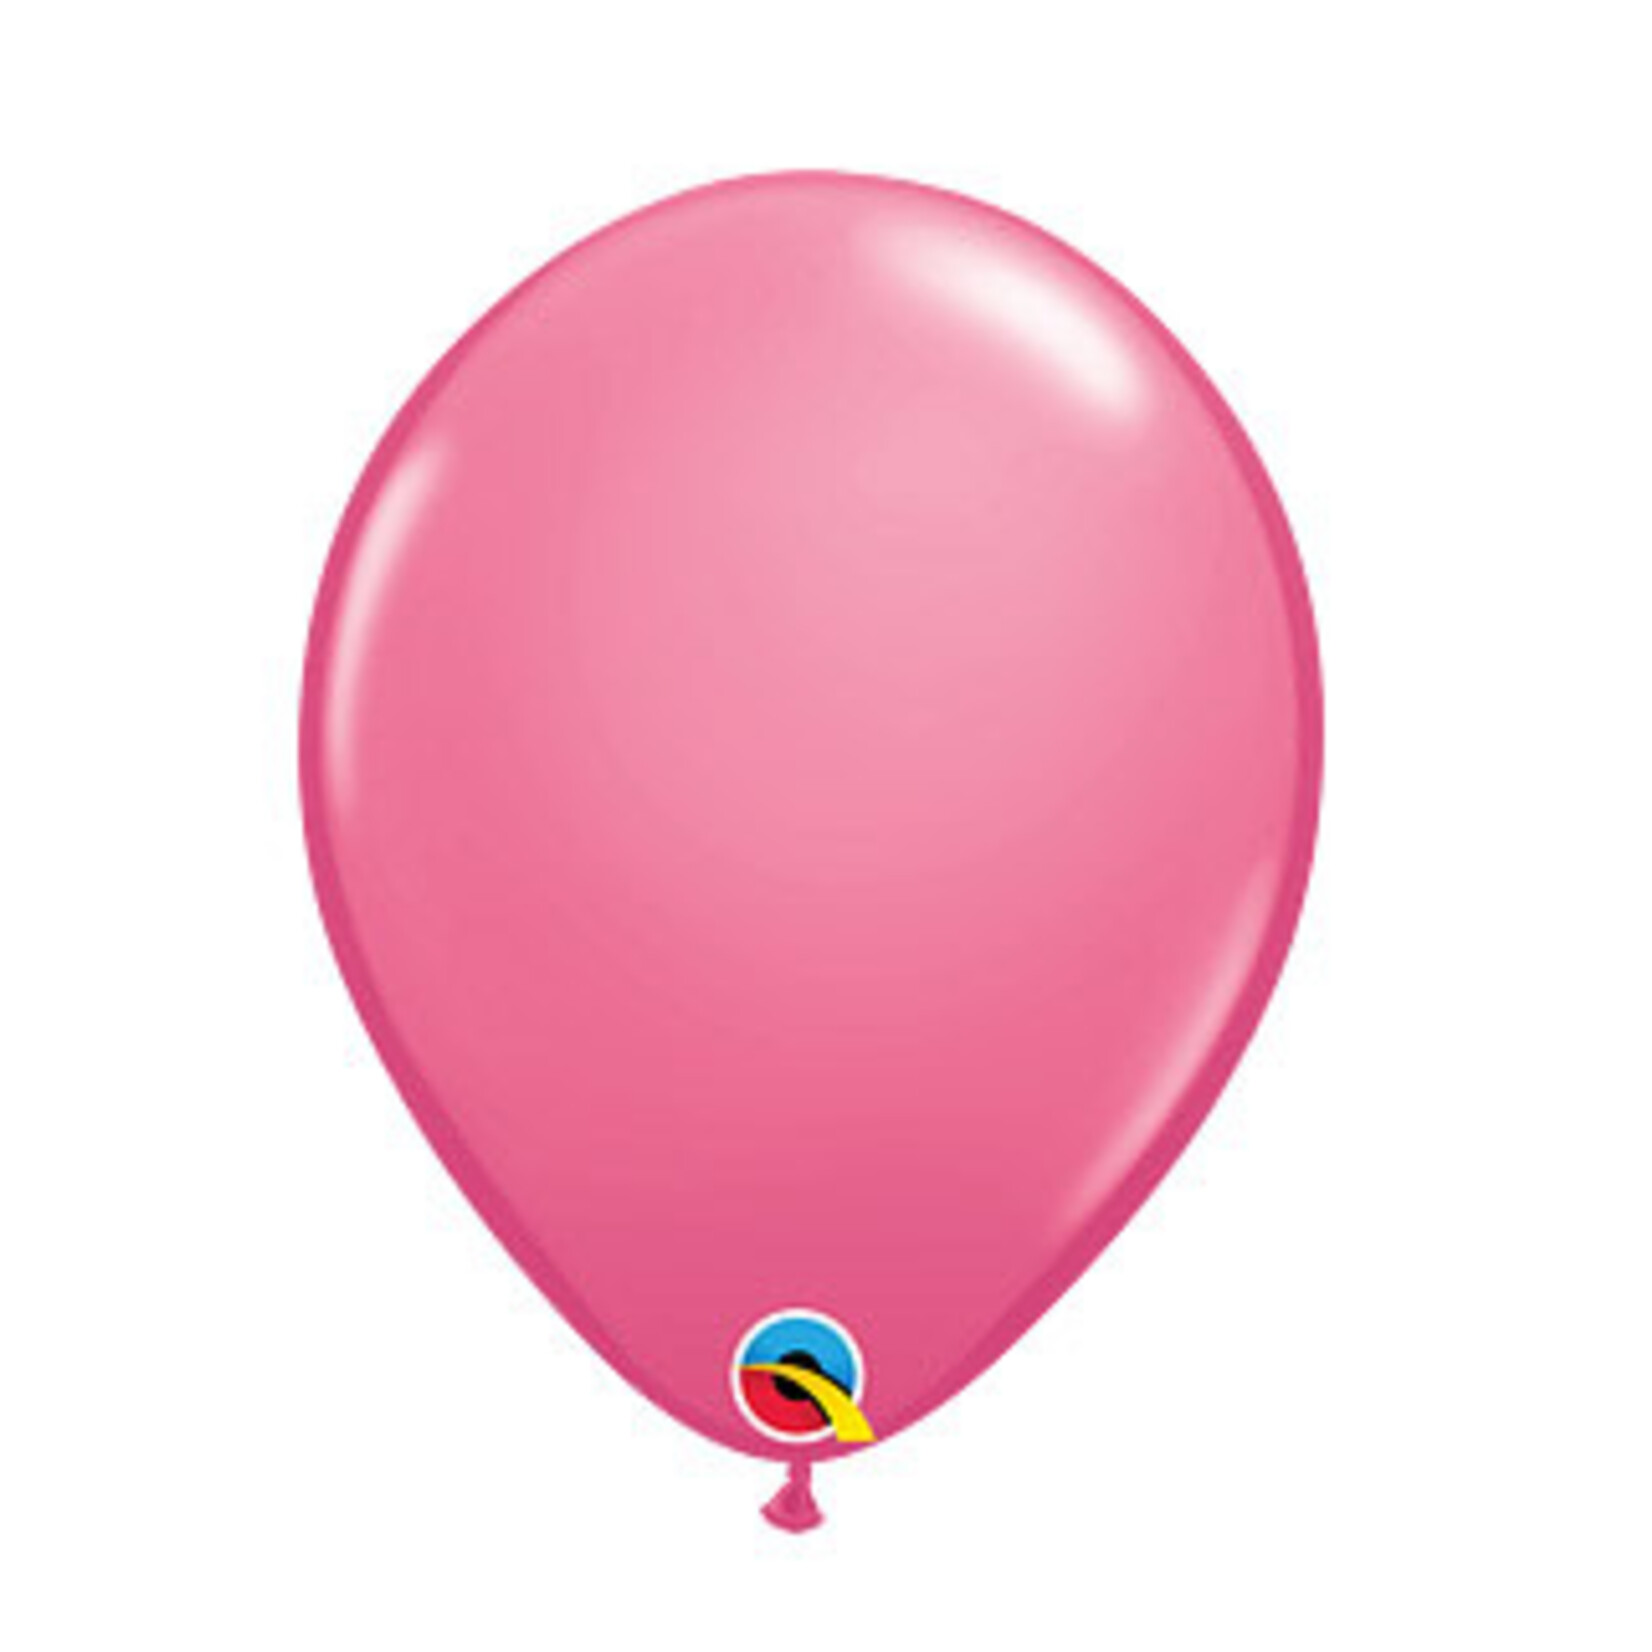 A to Z 11" Rose Qualatex Latex Balloons - 100ct.